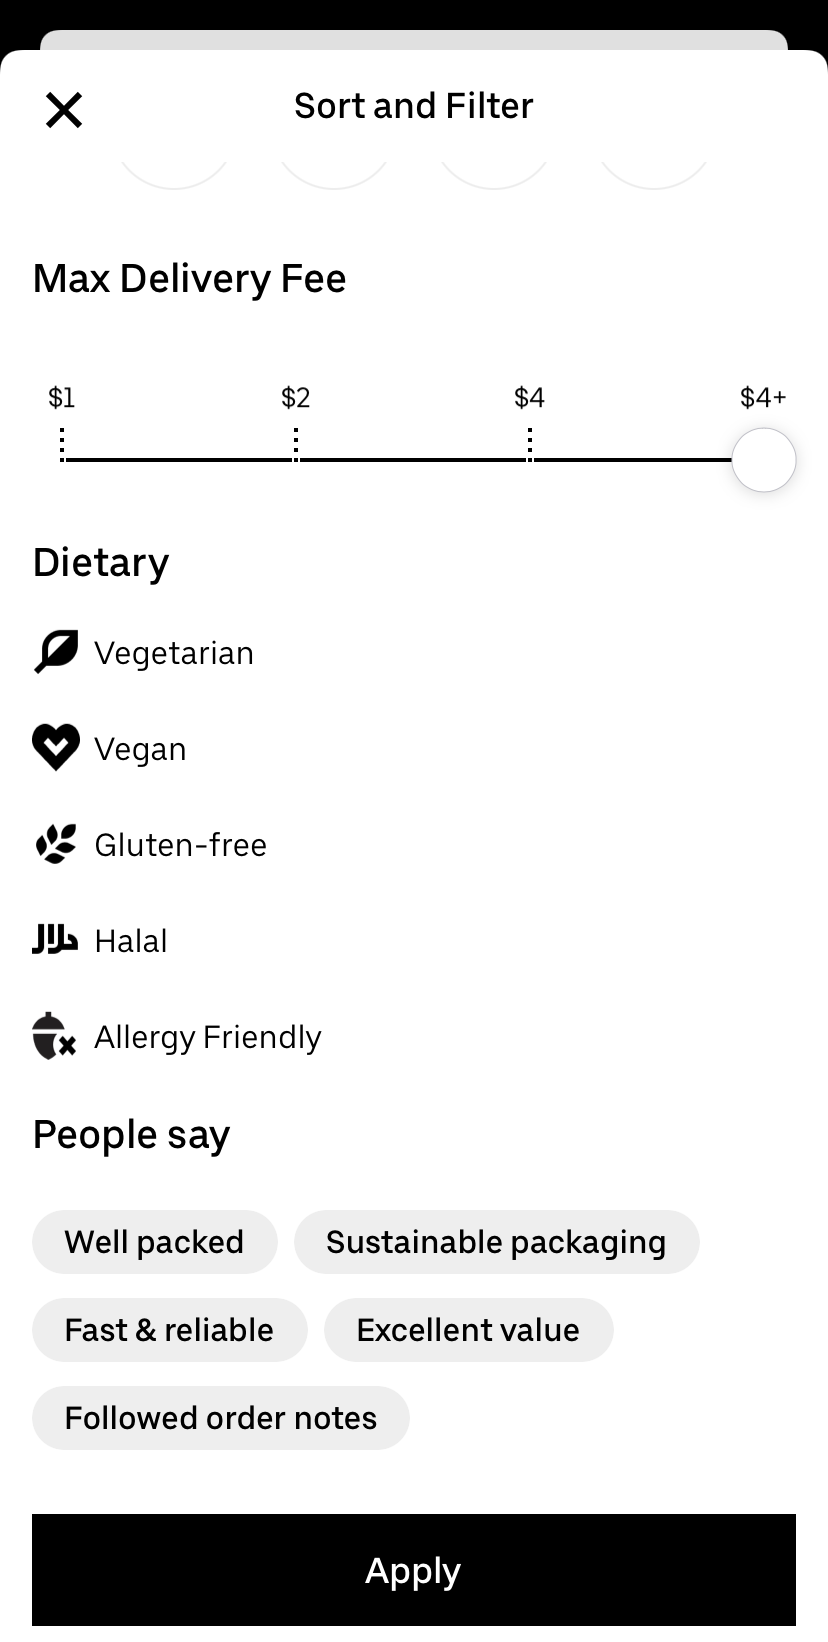 Uber Eats sort and filter options